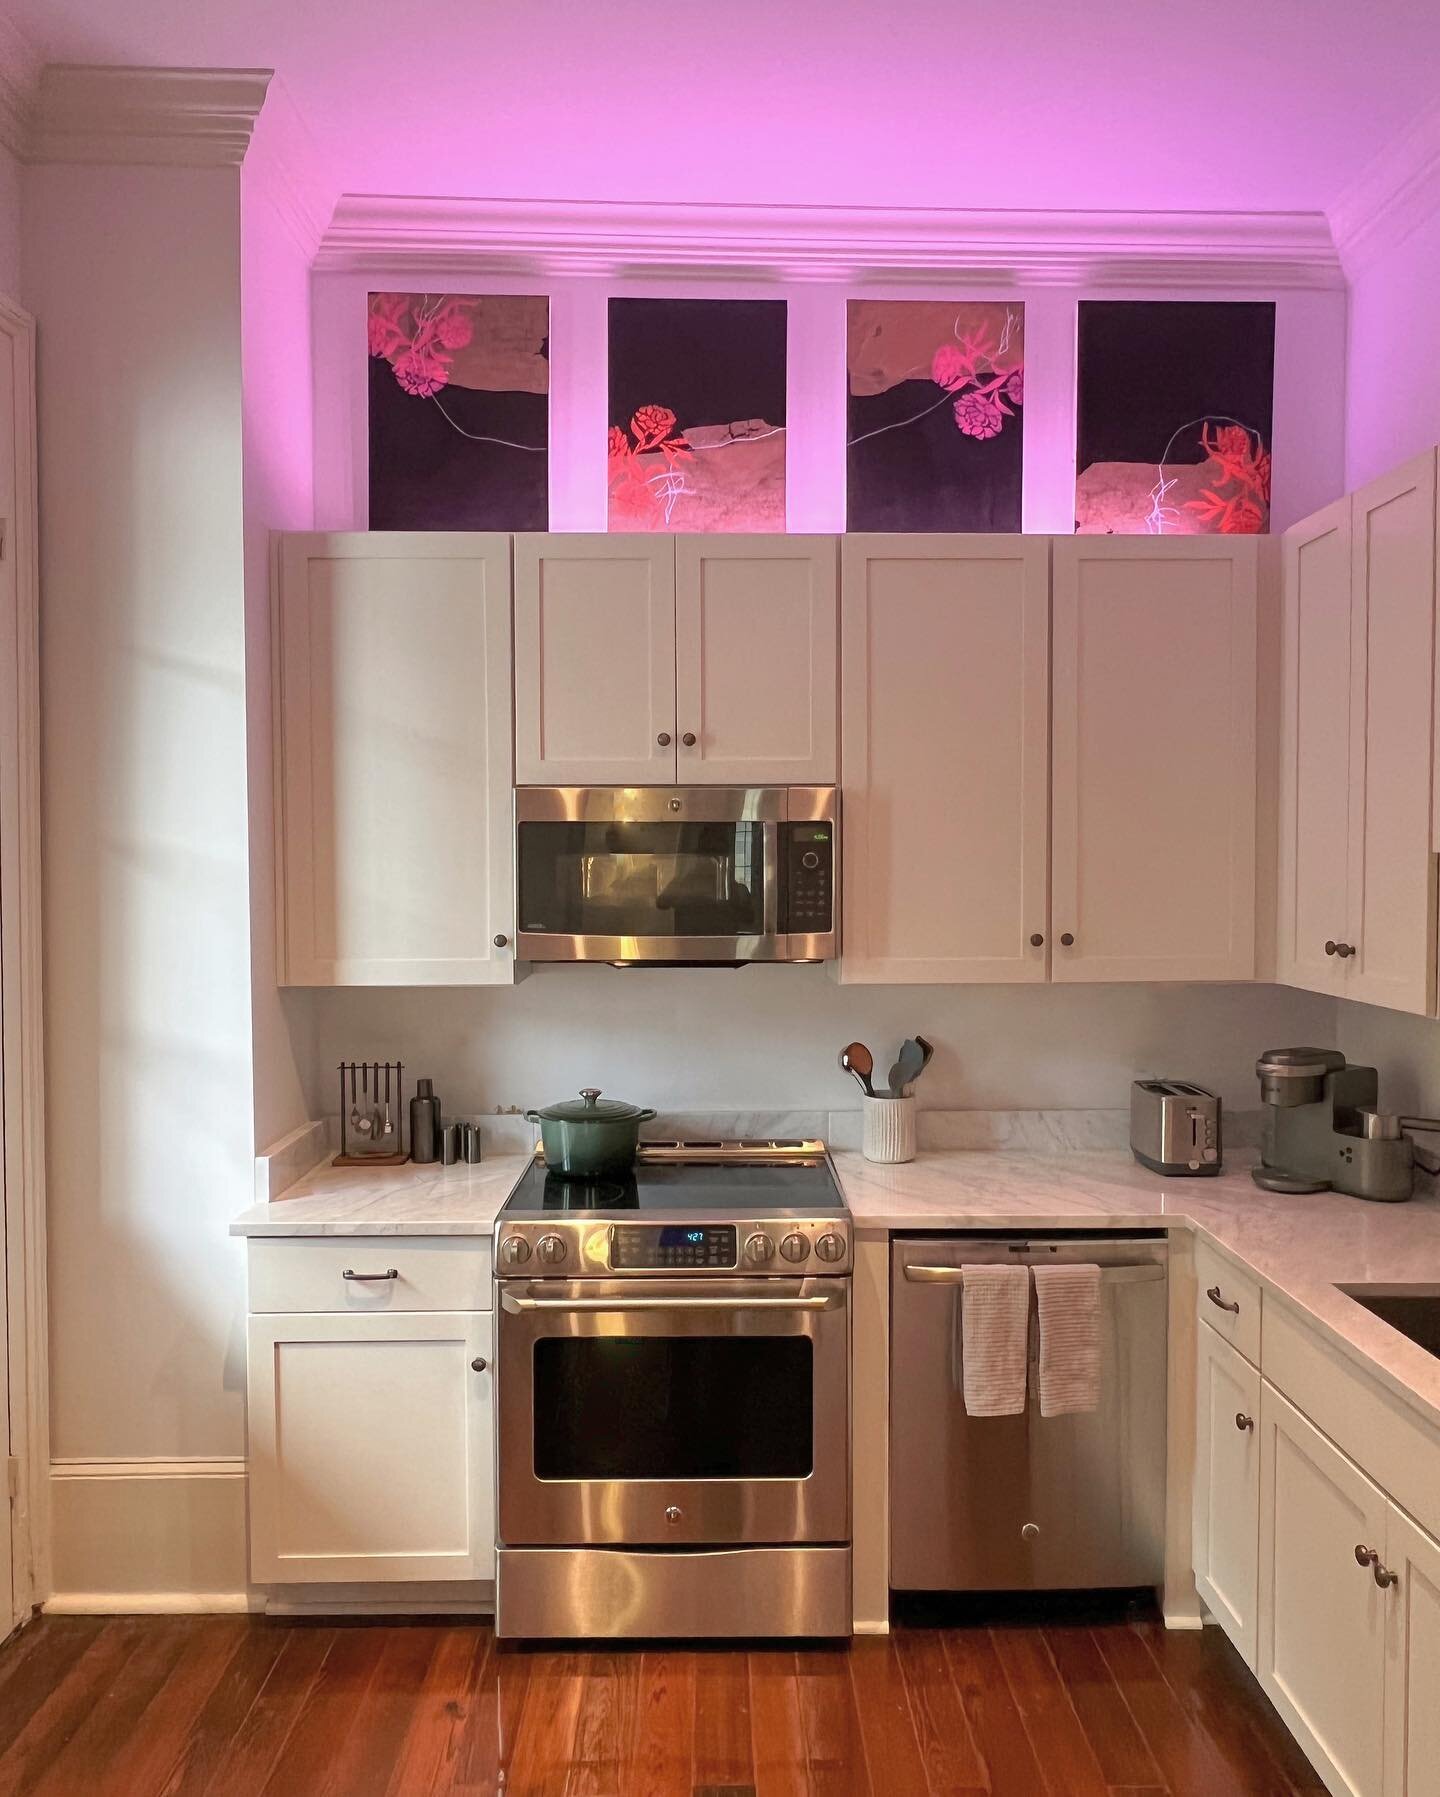 Cute little kitchen with a major artwork upgrade from @esomart_traceymose! Up-lights in hot pink adding some sass!!!